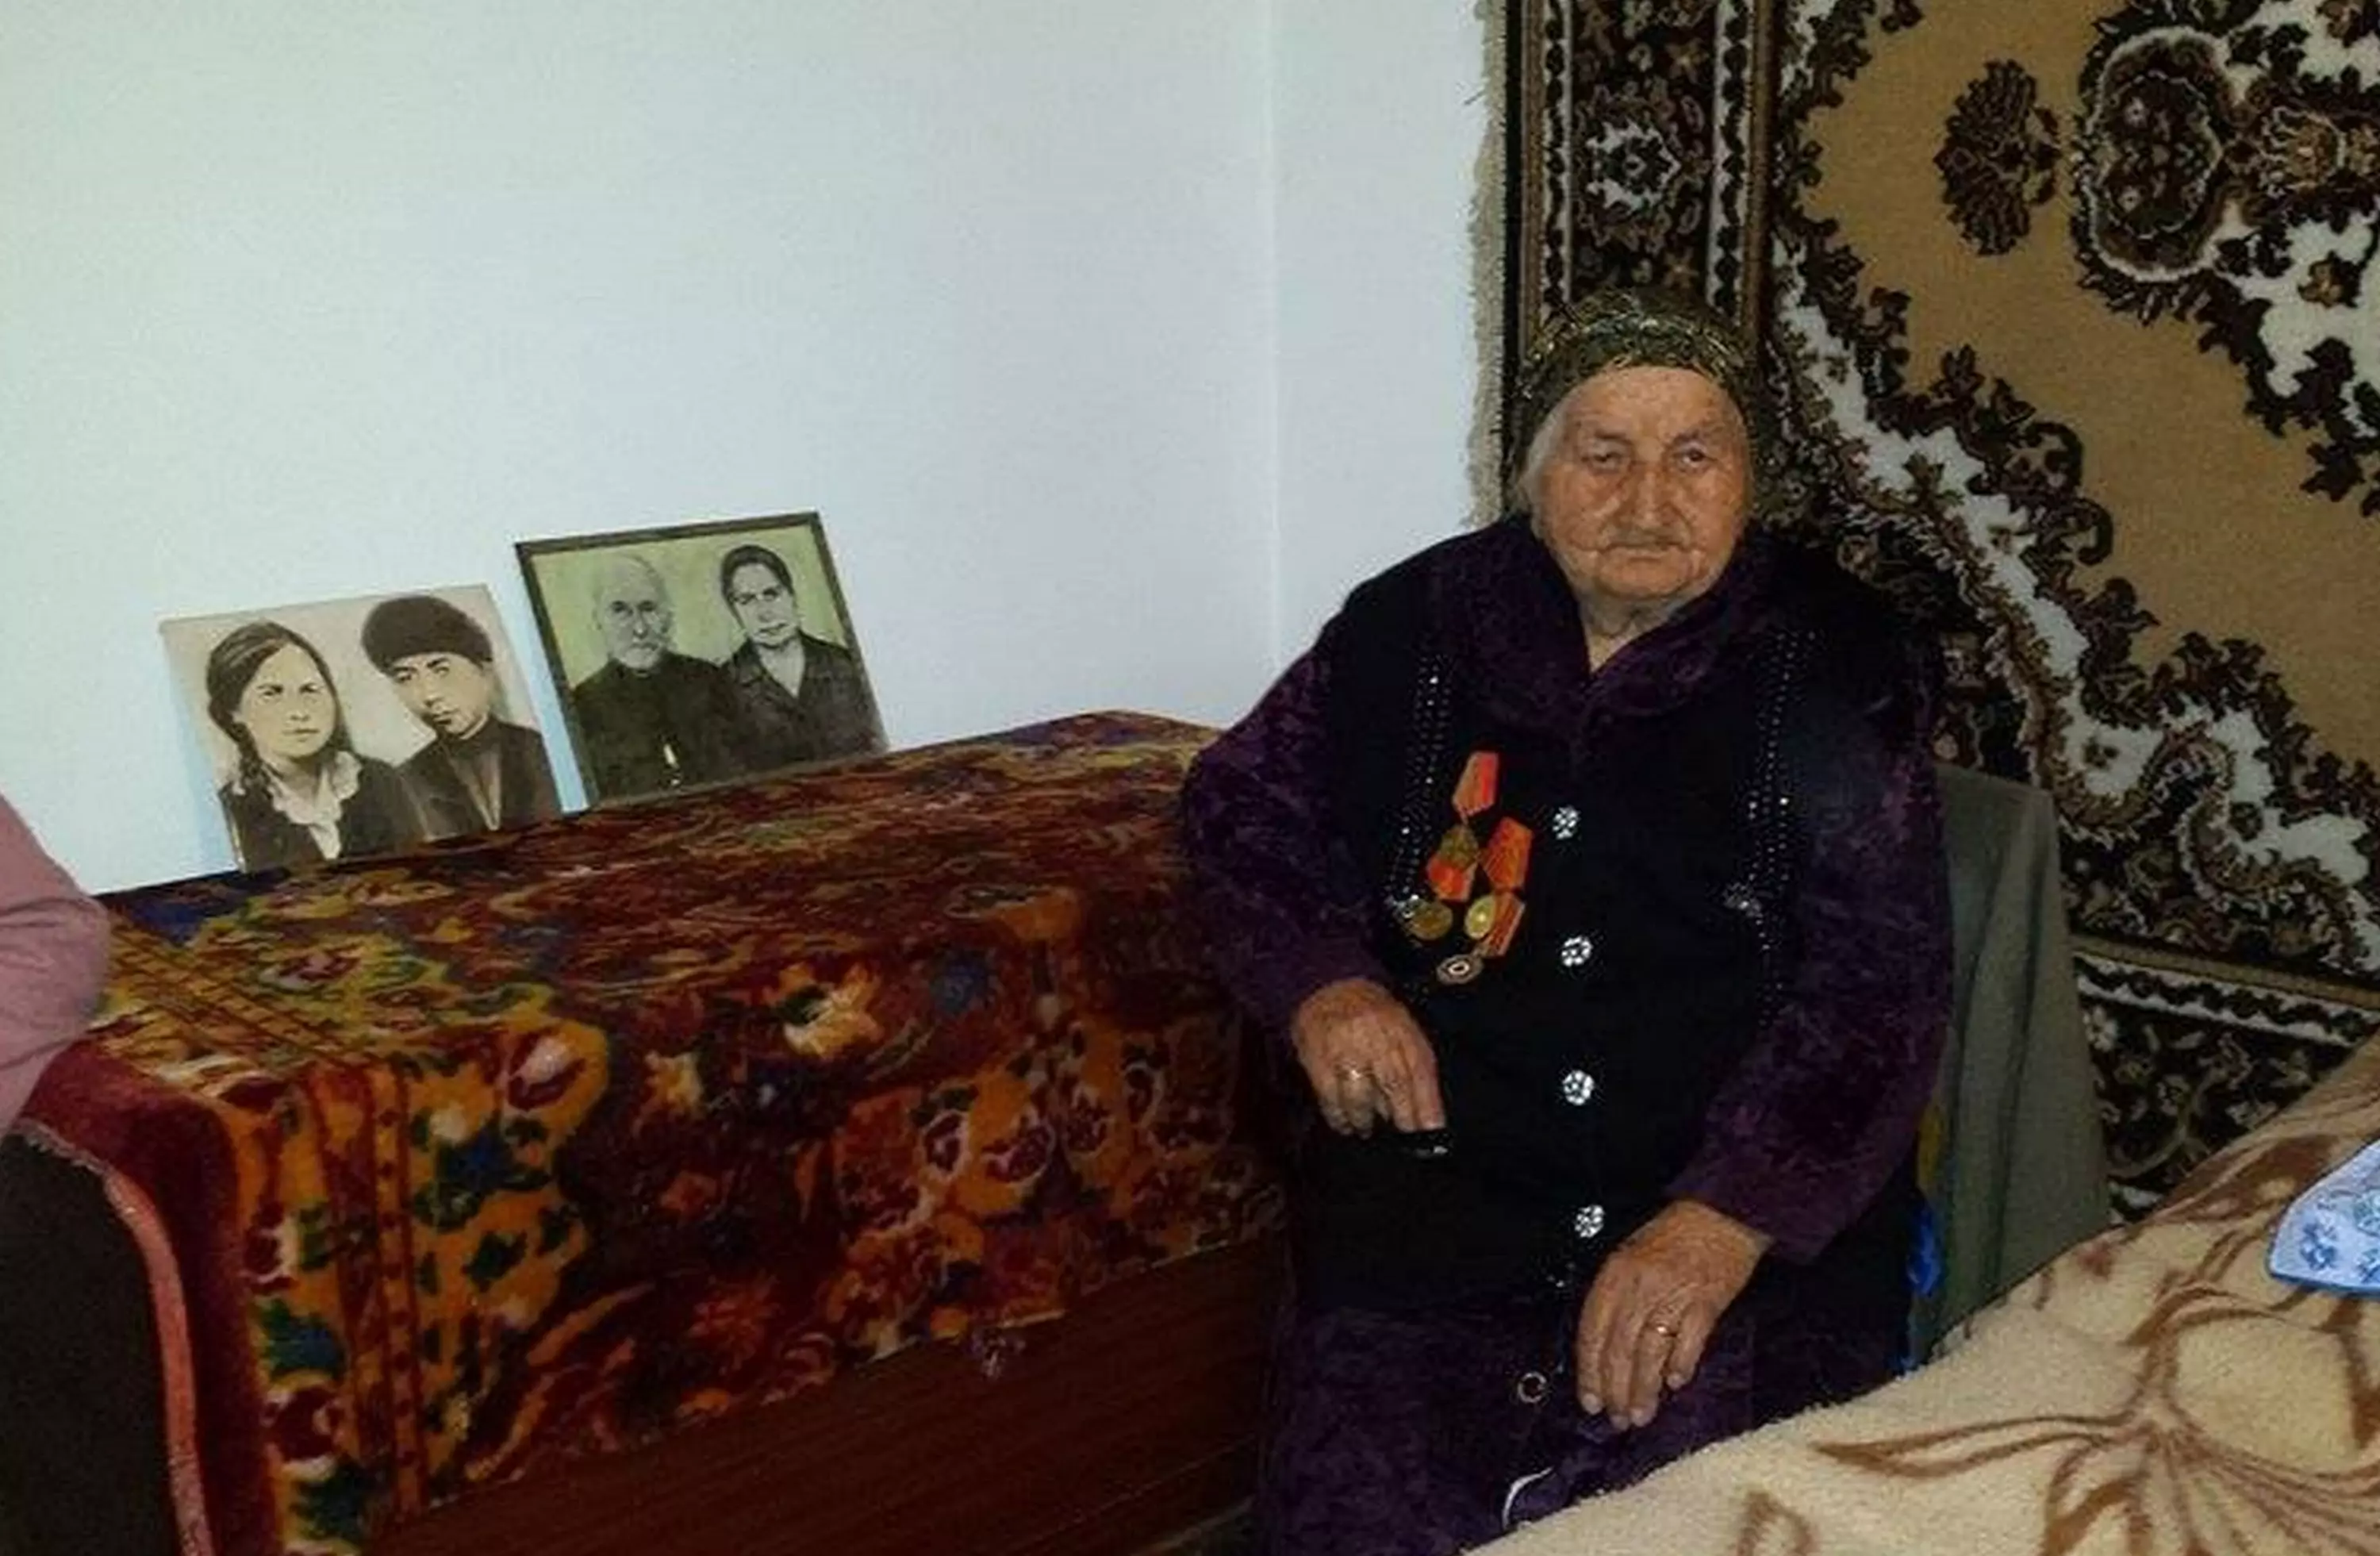 Nanu was registered two years ago in the Russia Book of Records as the oldest person in the country.